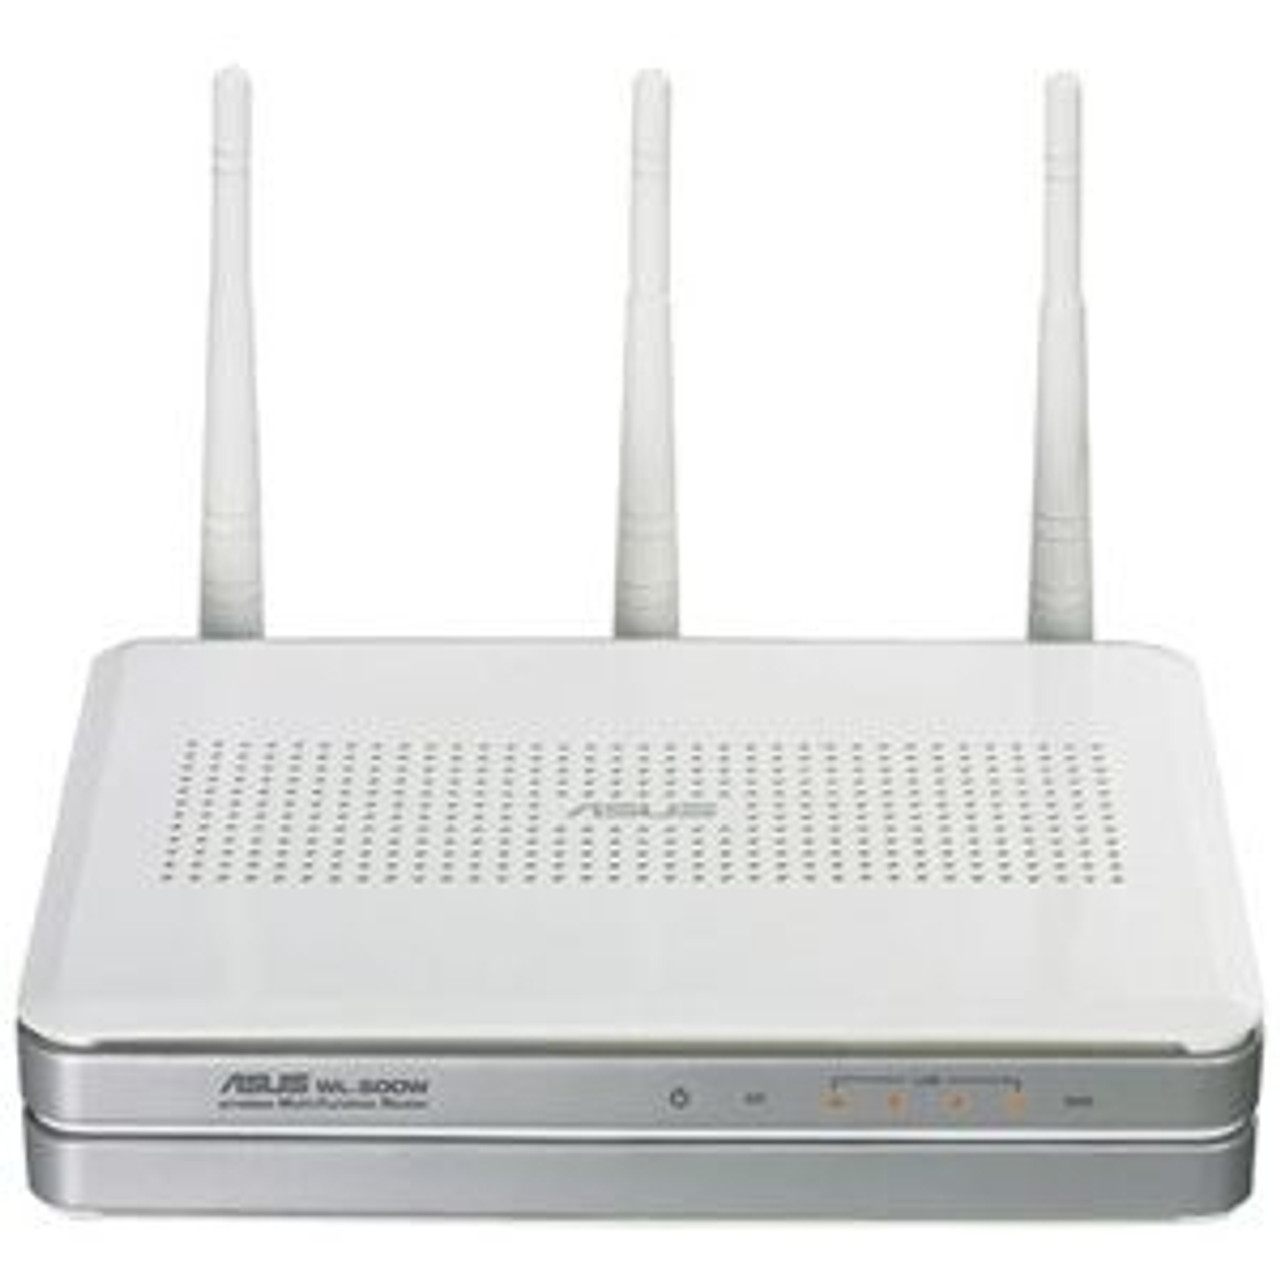 90-IAB002A00-1UAZ ASUS WL-500W 802.11n Multi-Functional Wireless Router (Refurbished)